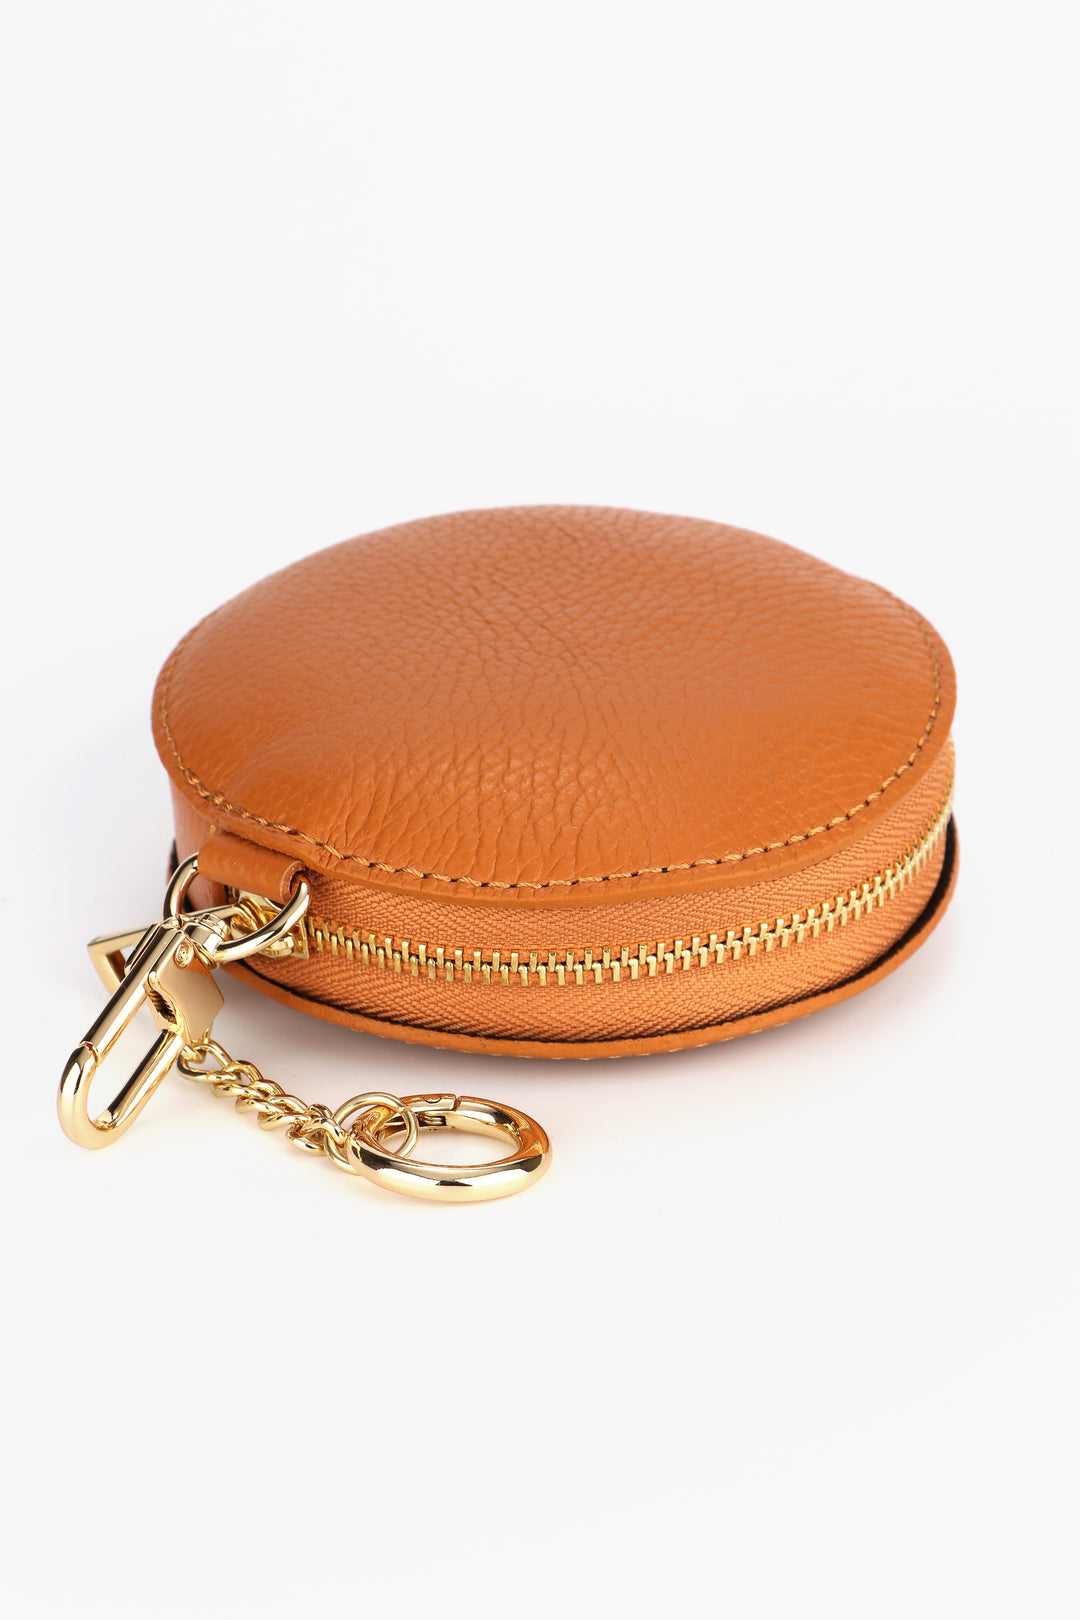 tan coloured leather coin purse with a zip closure and two key ring attachements